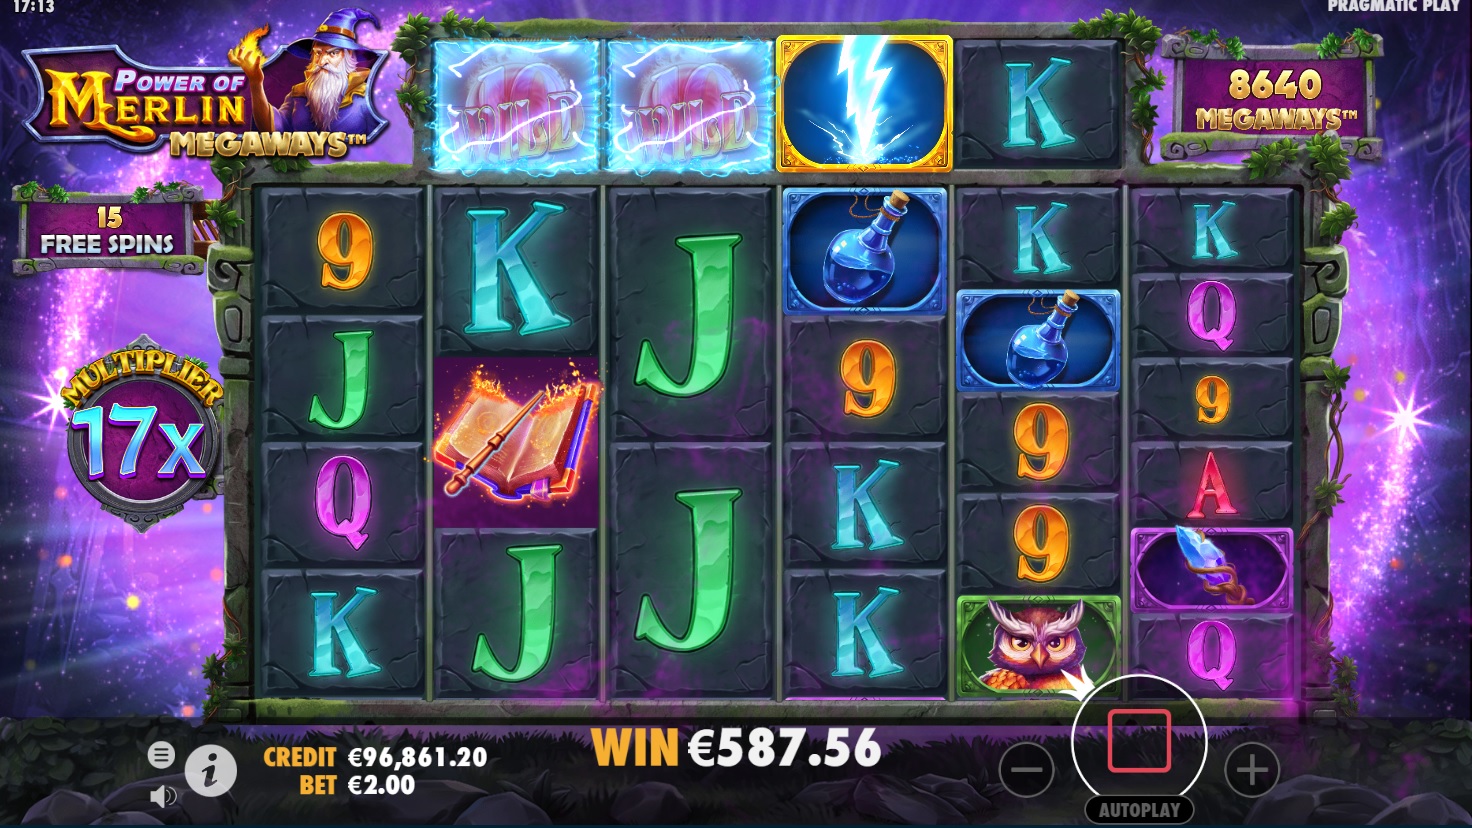 Power of Merlin Megaways, Free spins feature